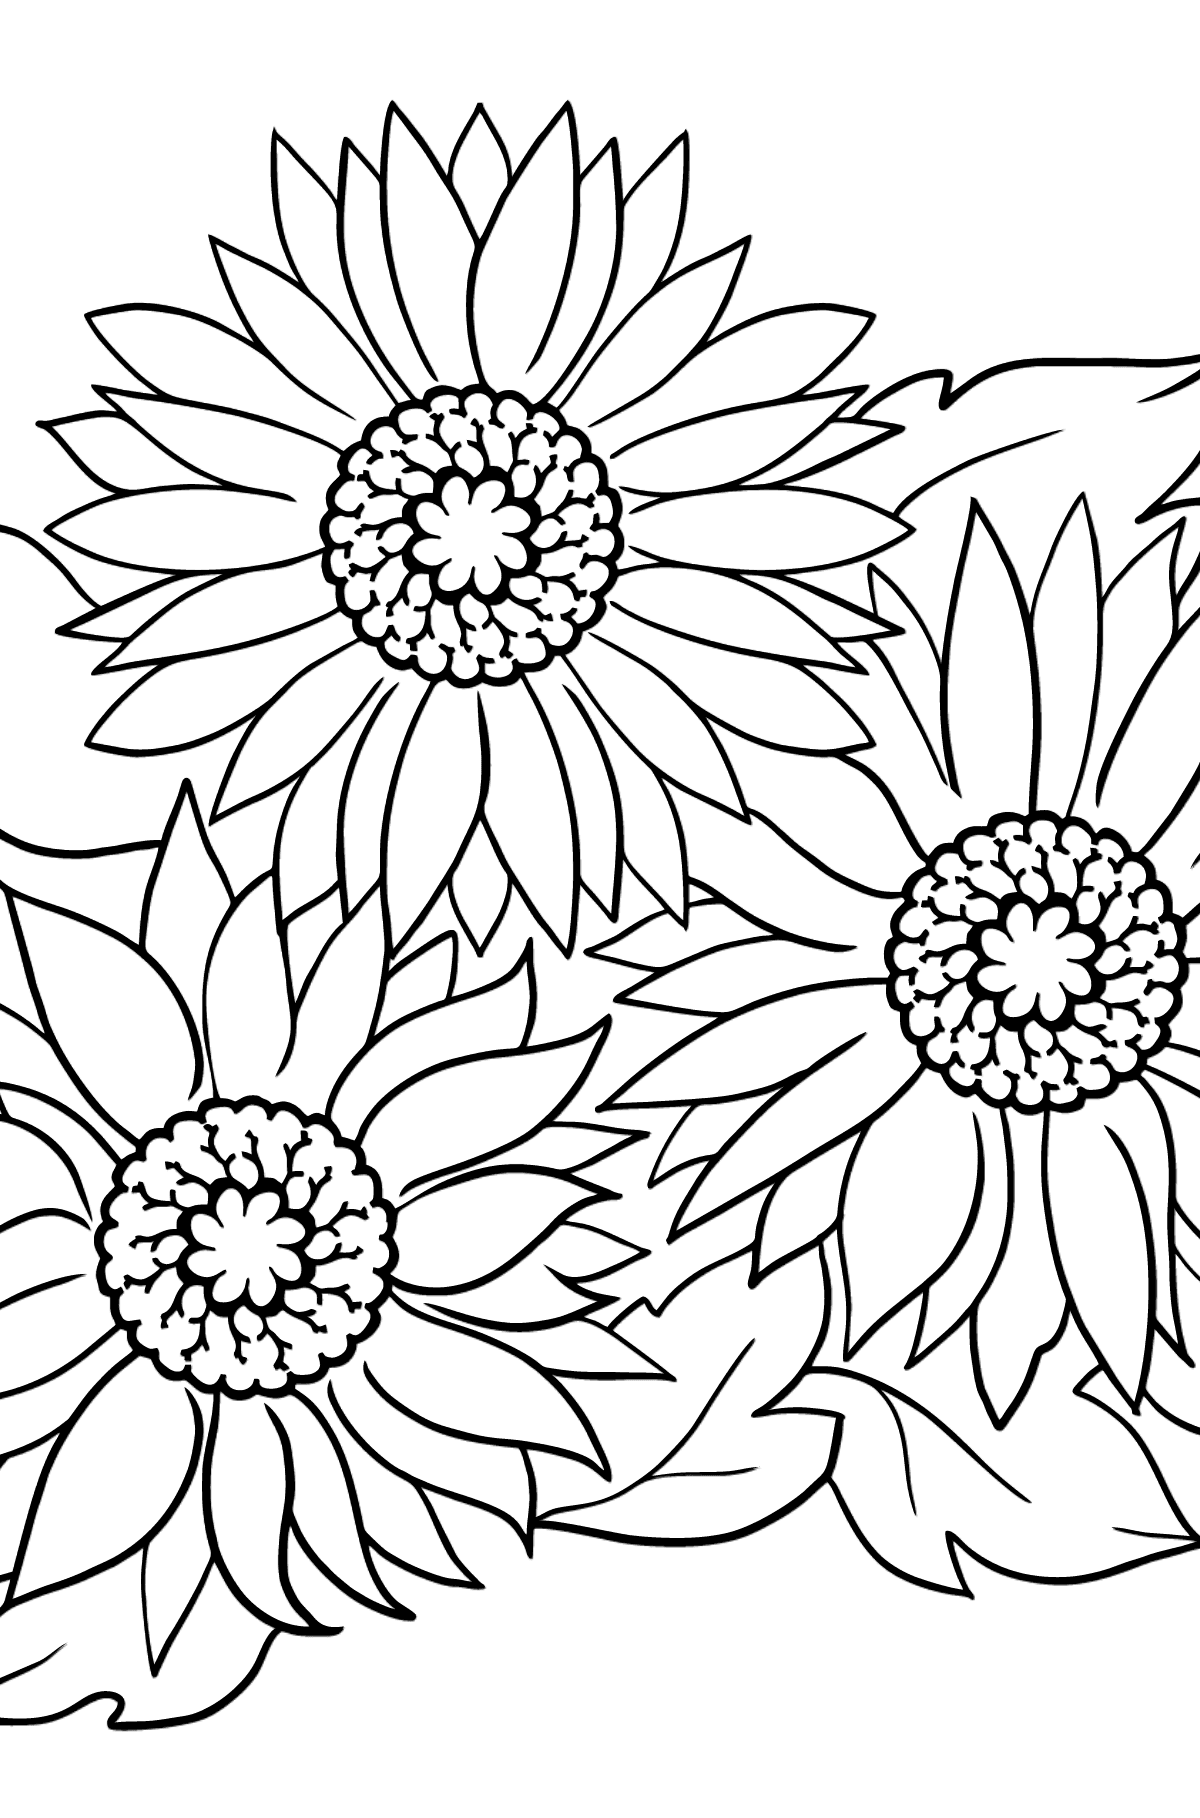 Coloring Page - Yellow Gerbera - Coloring Pages for Kids